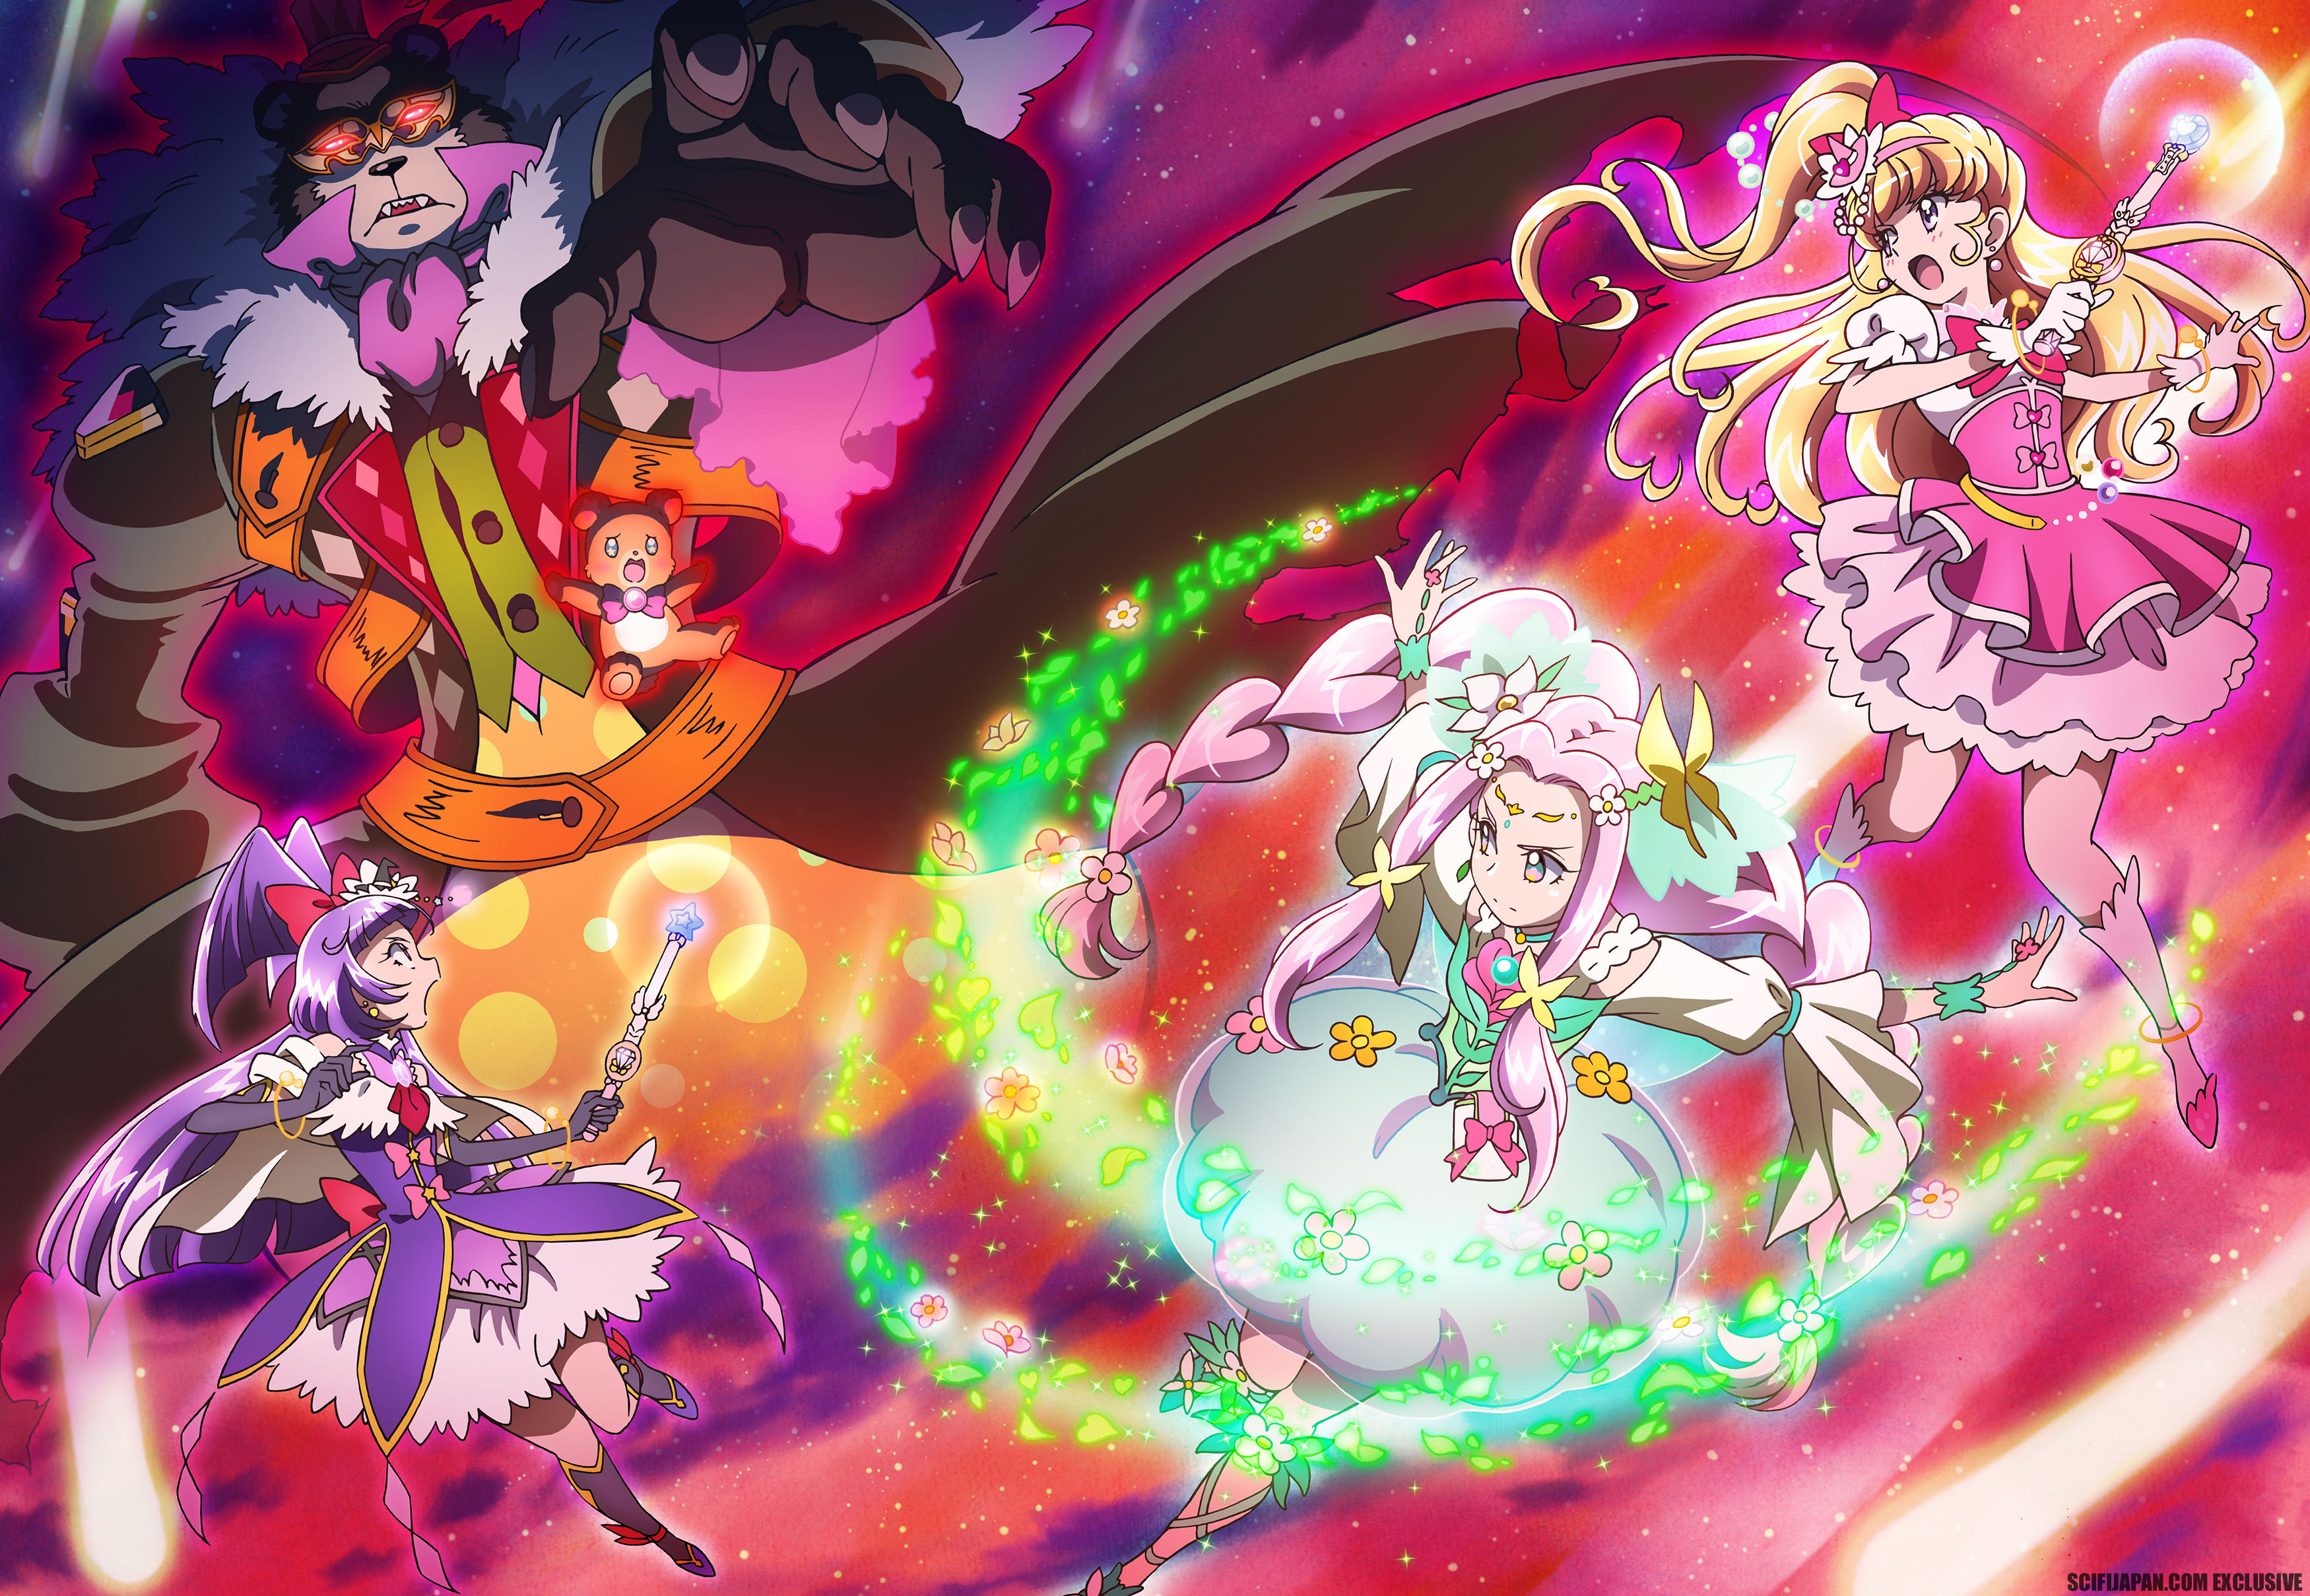 Toei Animation Unveils Yes! Precure 5 & Maho Girls Precure! Sequel